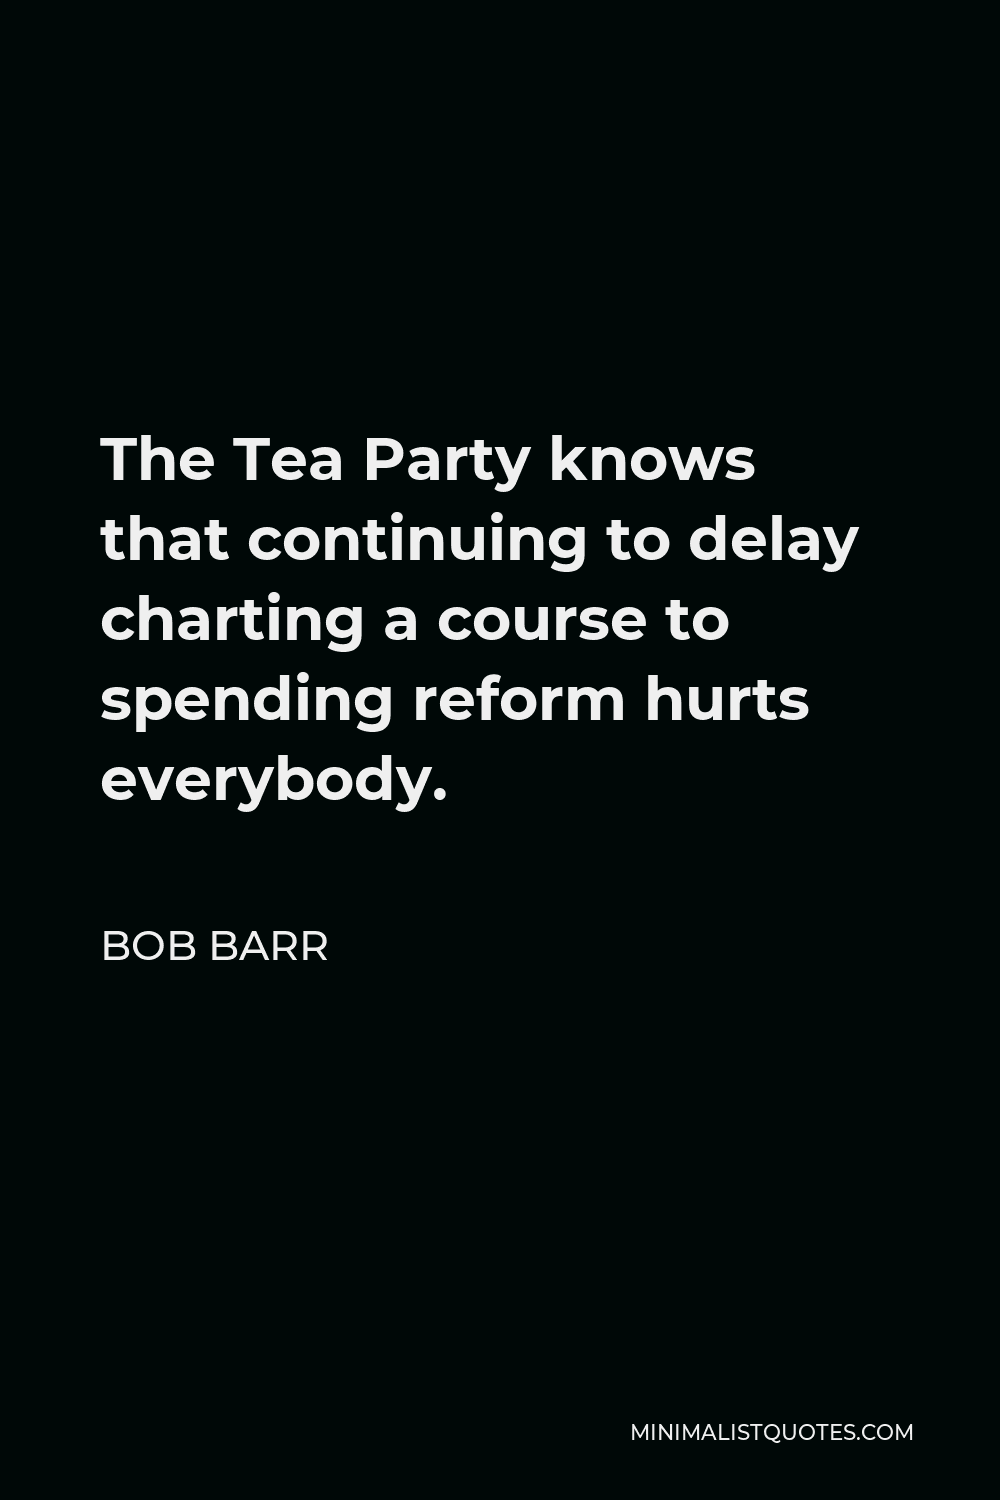 Bob Barr Quote - The Tea Party knows that continuing to delay charting a course to spending reform hurts everybody.